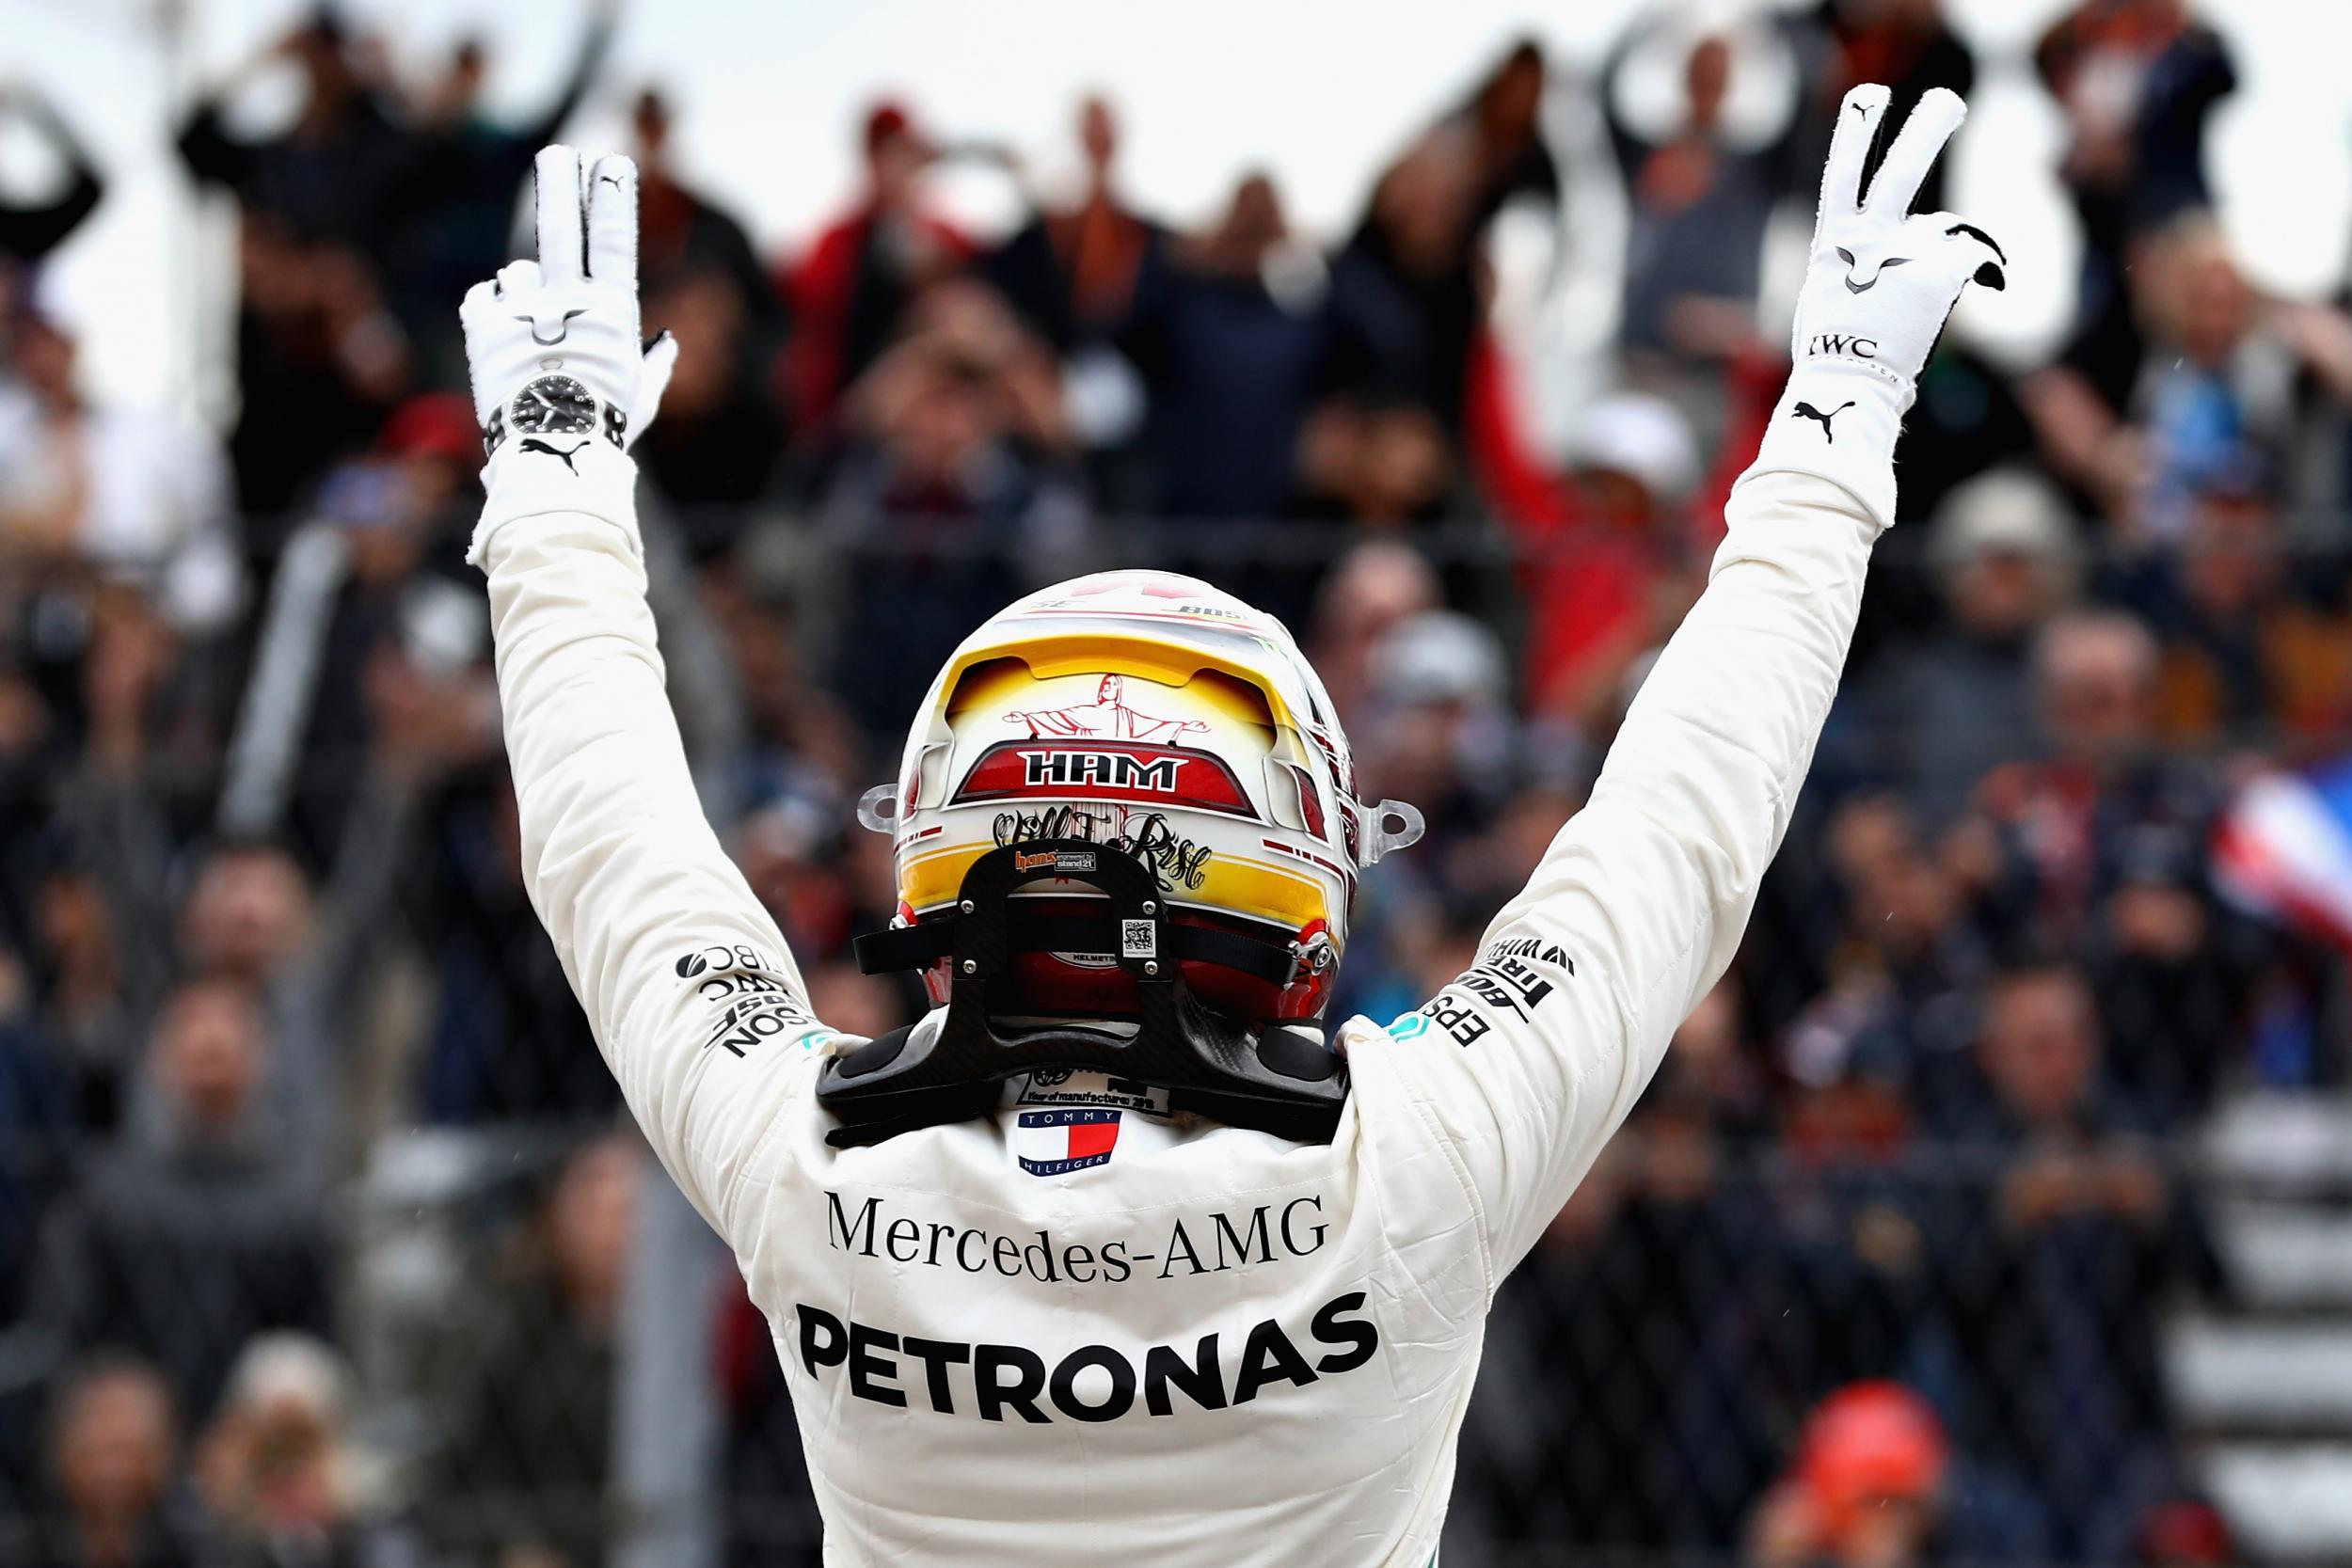 Lewis Hamilton is now a five-time world champion